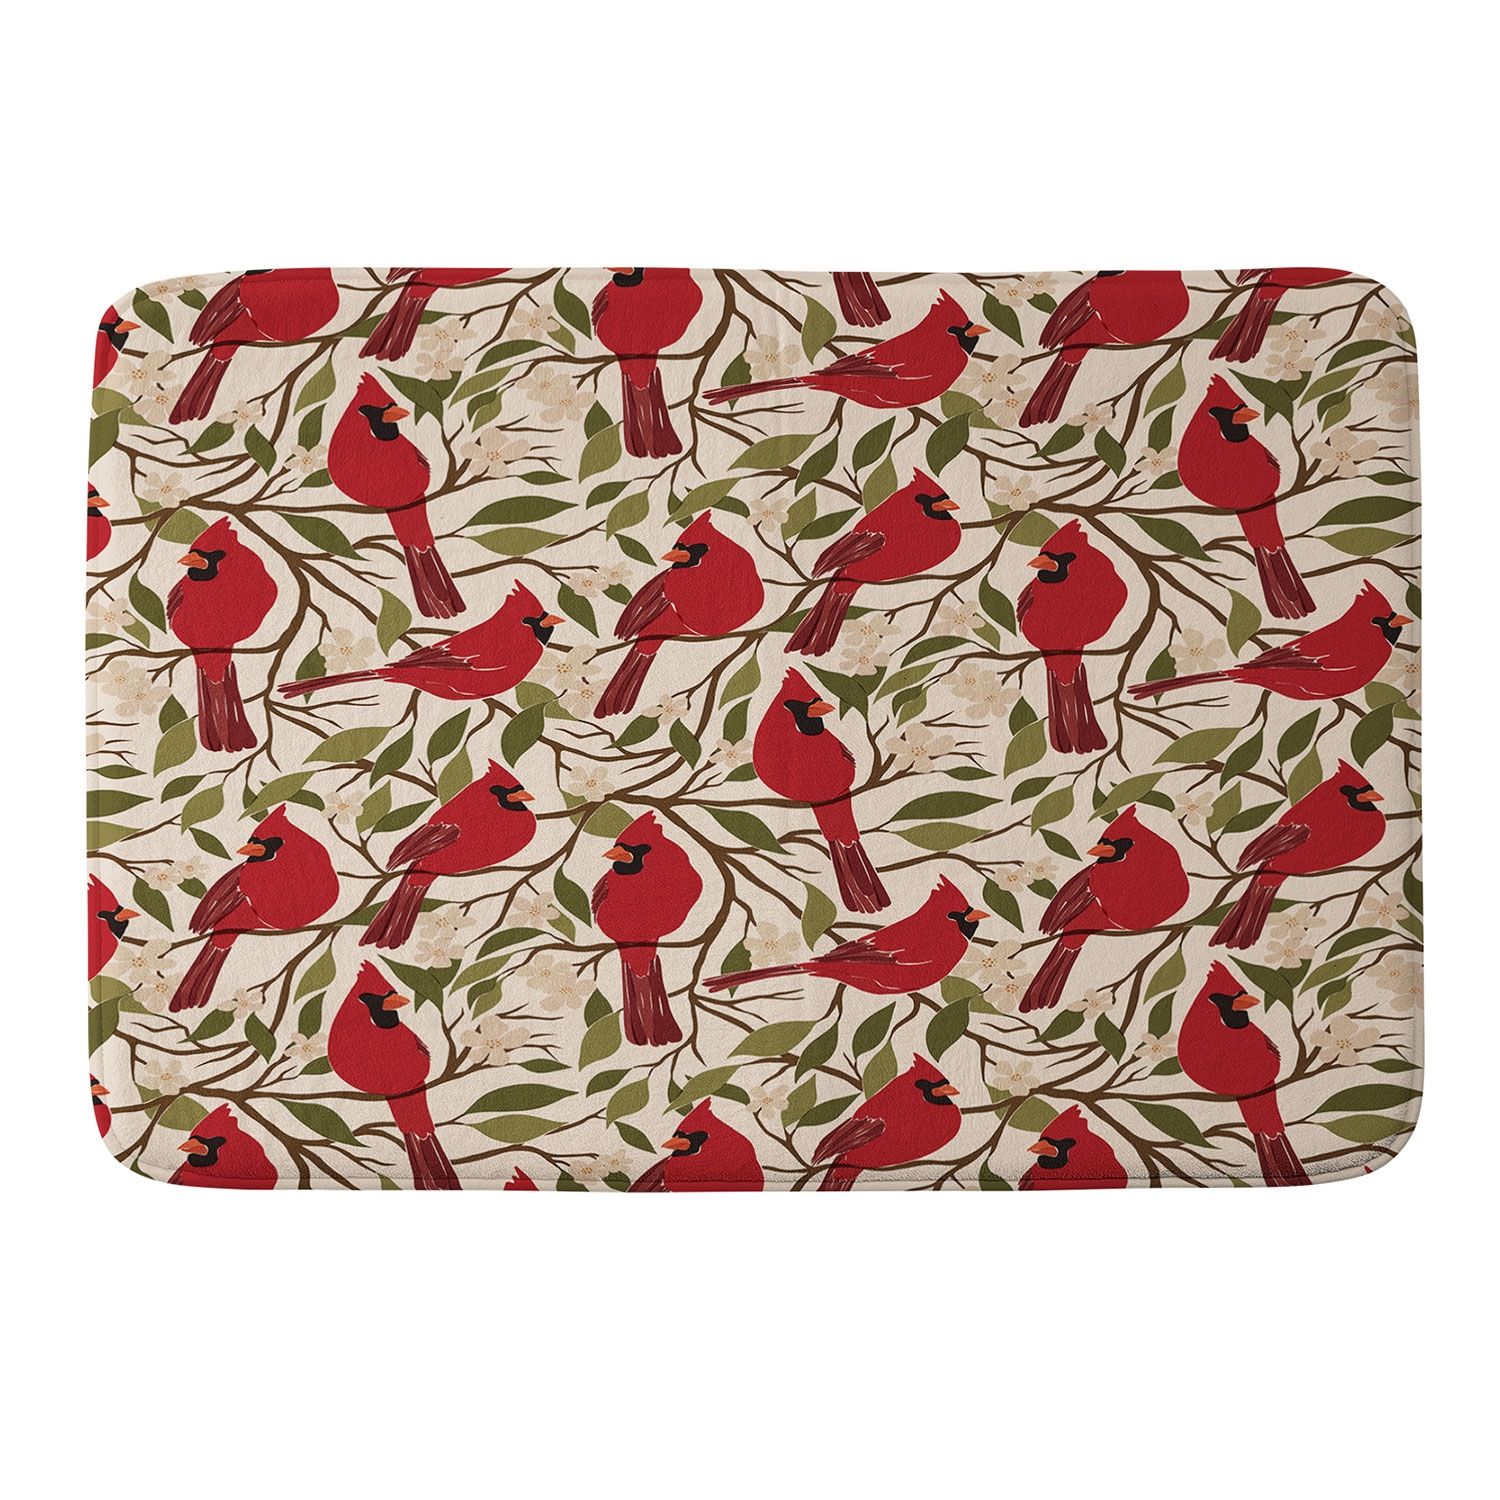 Cardinals On Blossoming Tree by Cuss Yeah Designs - Memory Foam Bath Mat 21" x 34" - Image 0